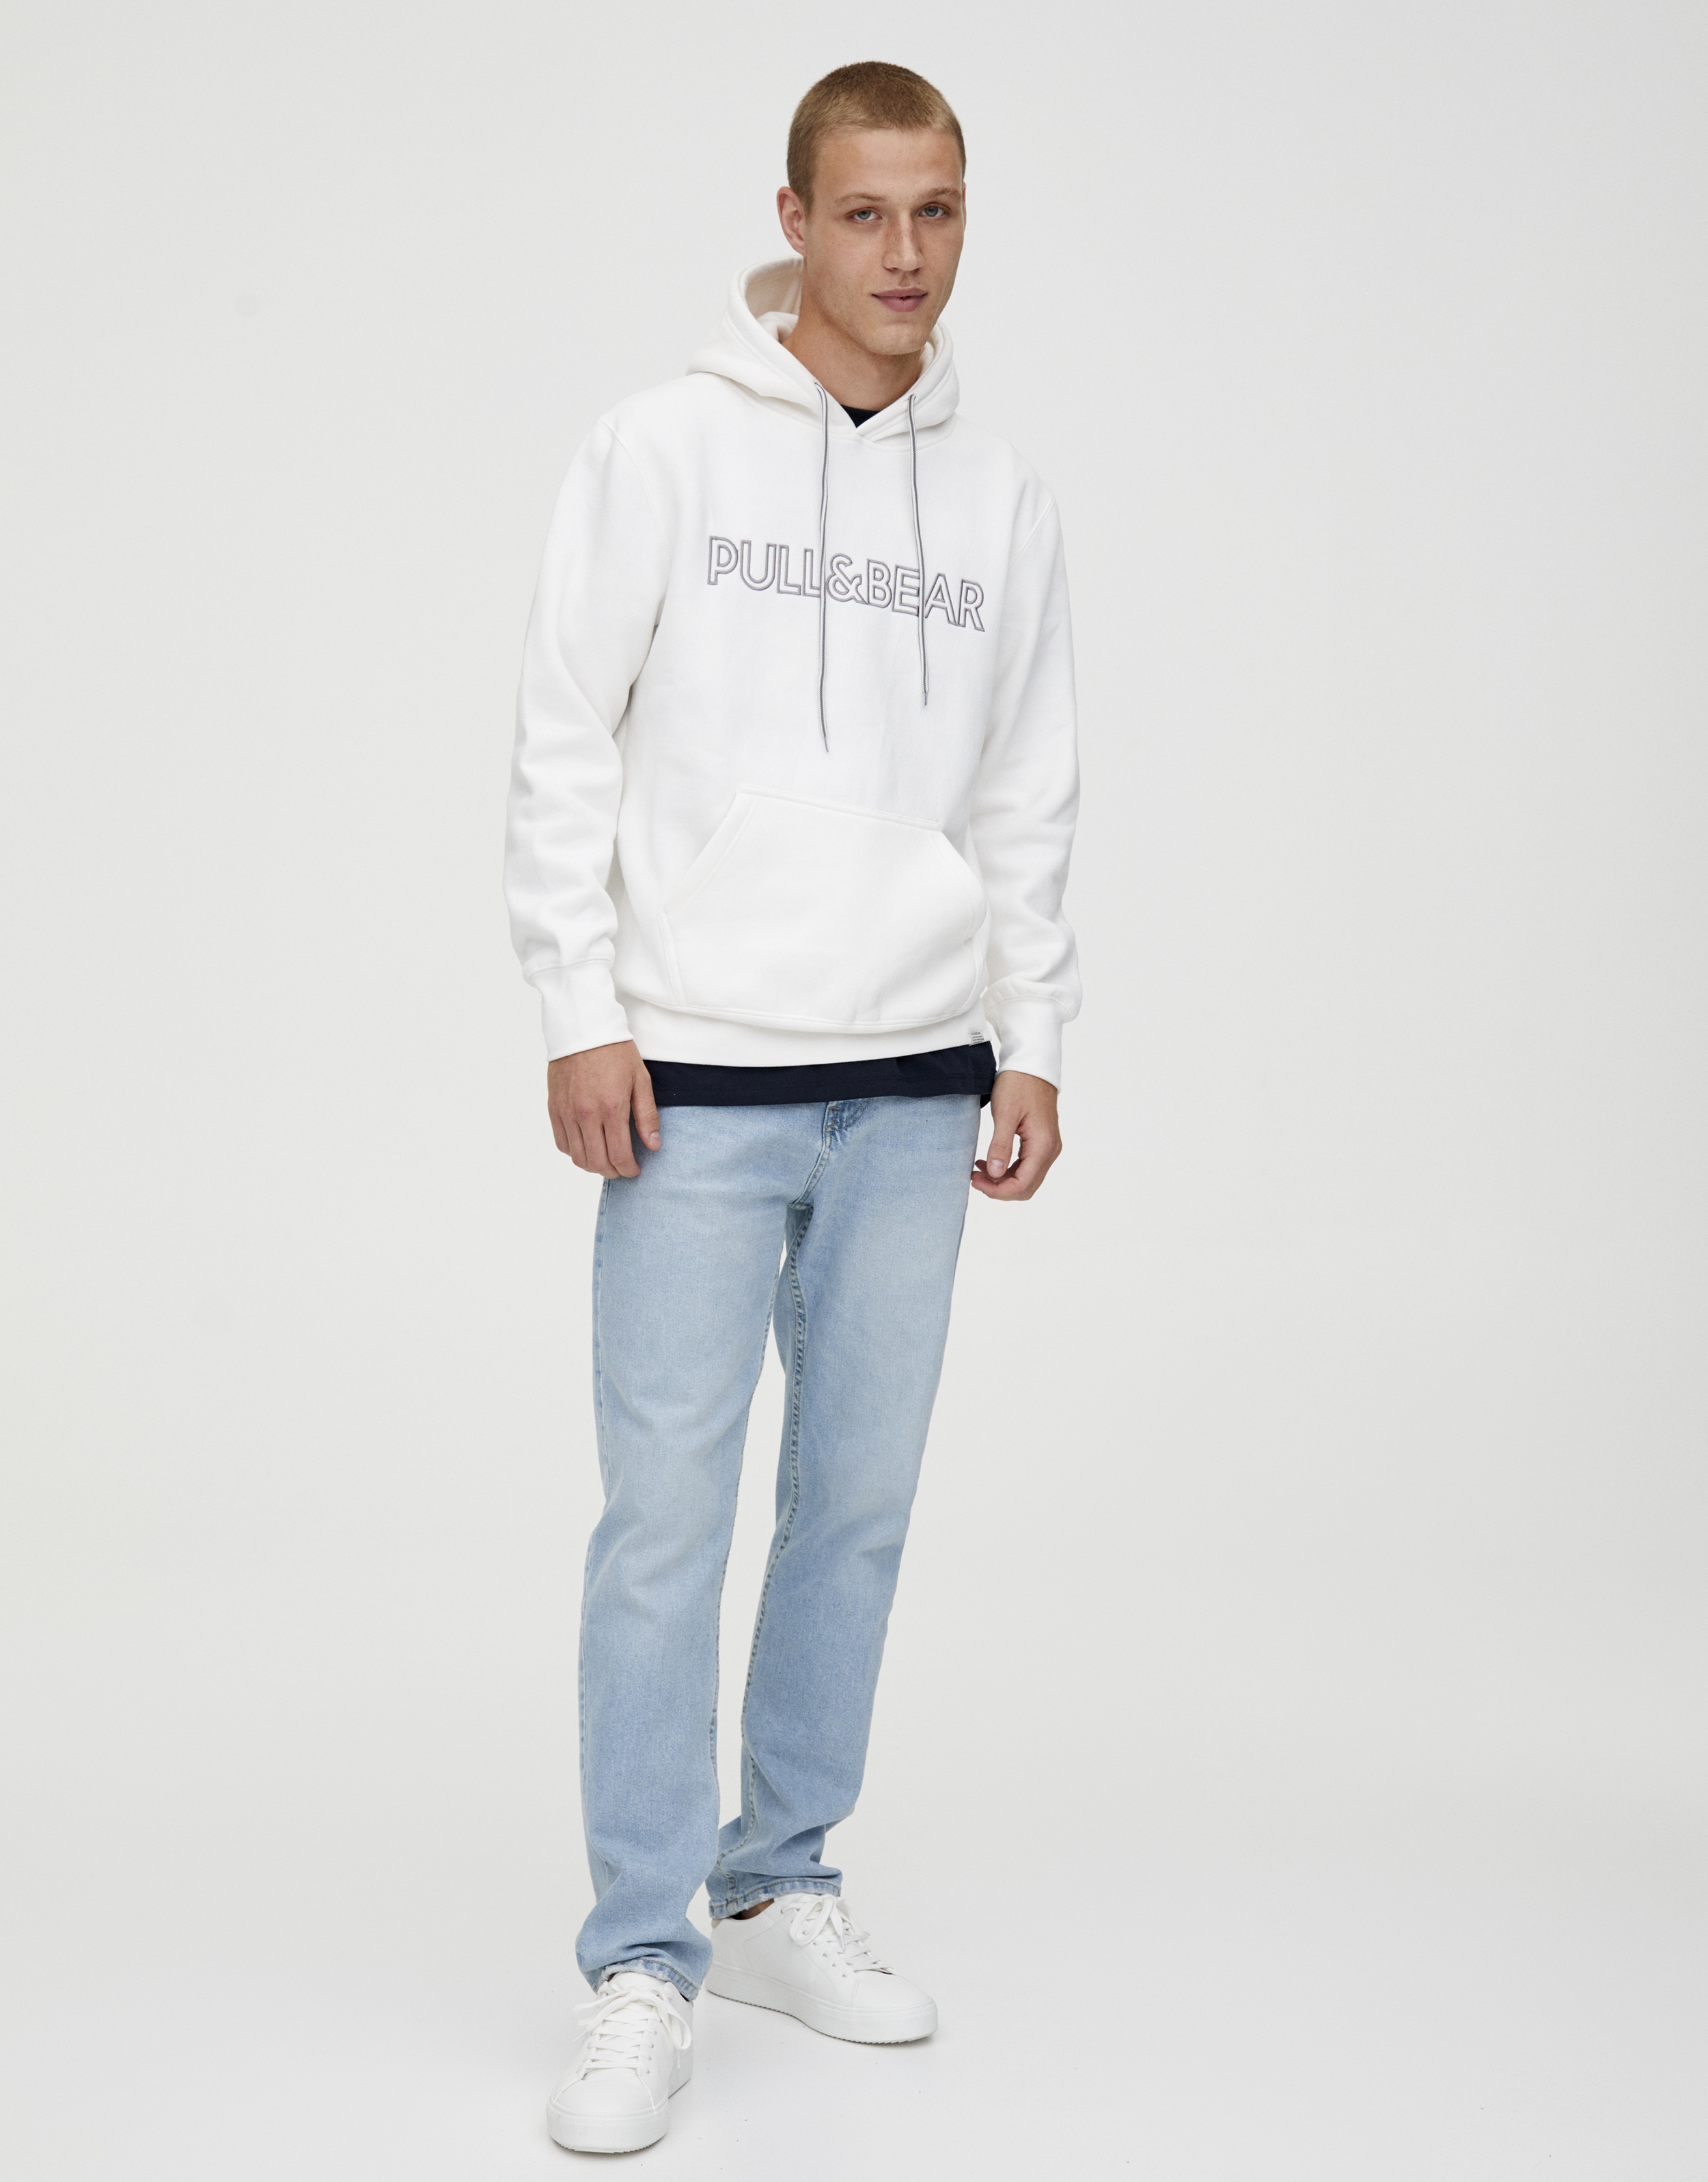 Pull And Bear Hoodie Size Chart